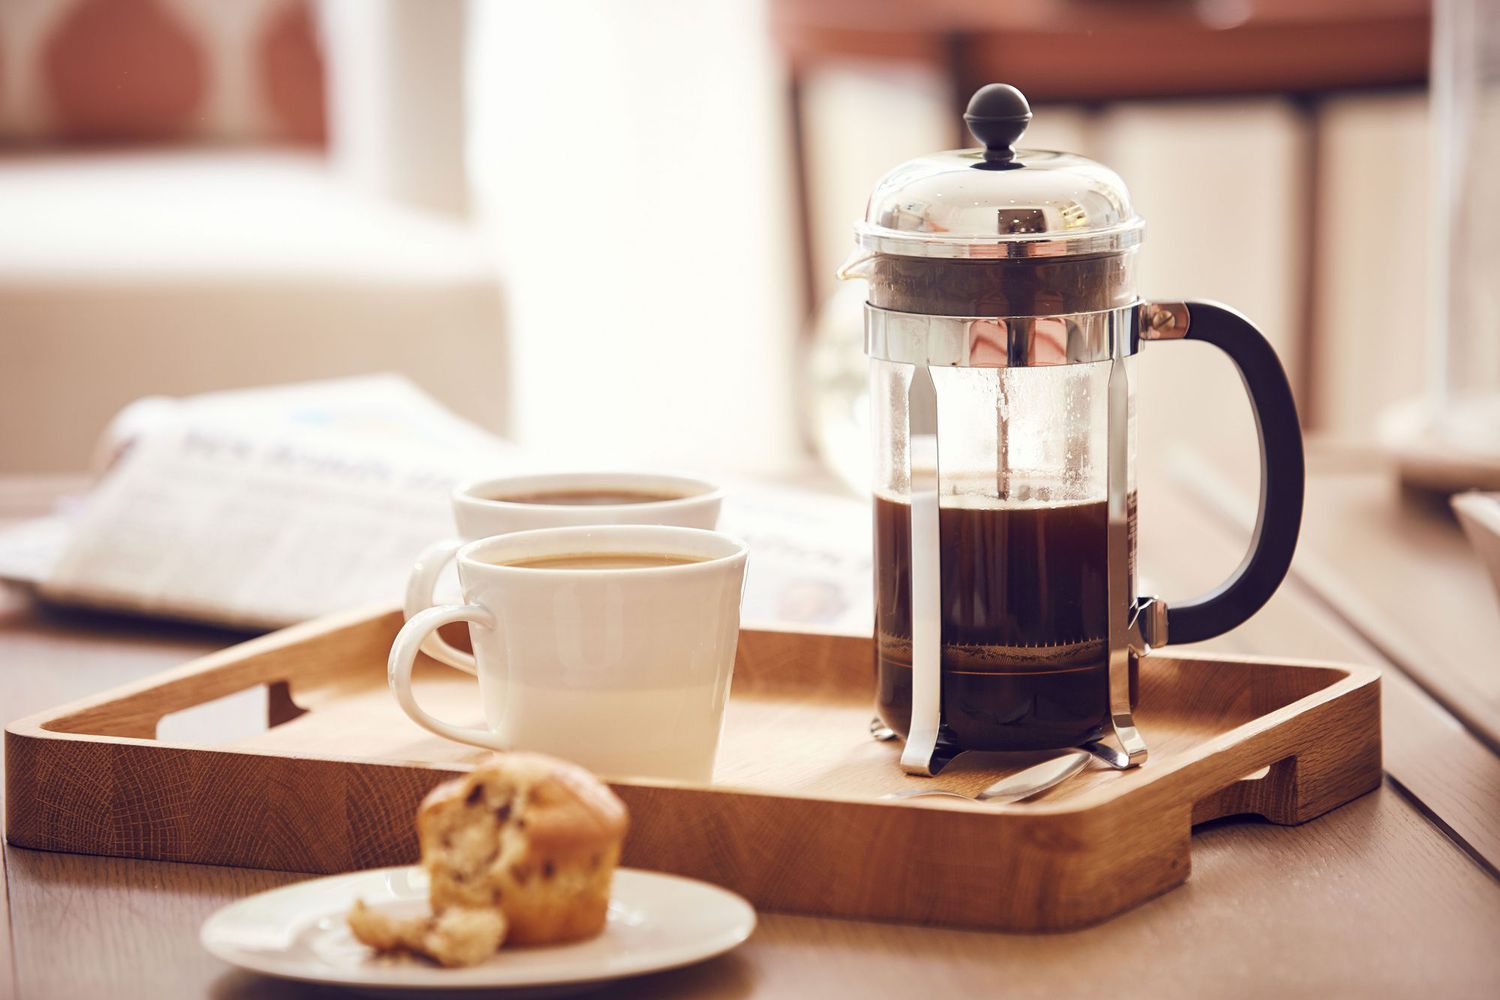 How to Make French Press Coffee | Allrecipes